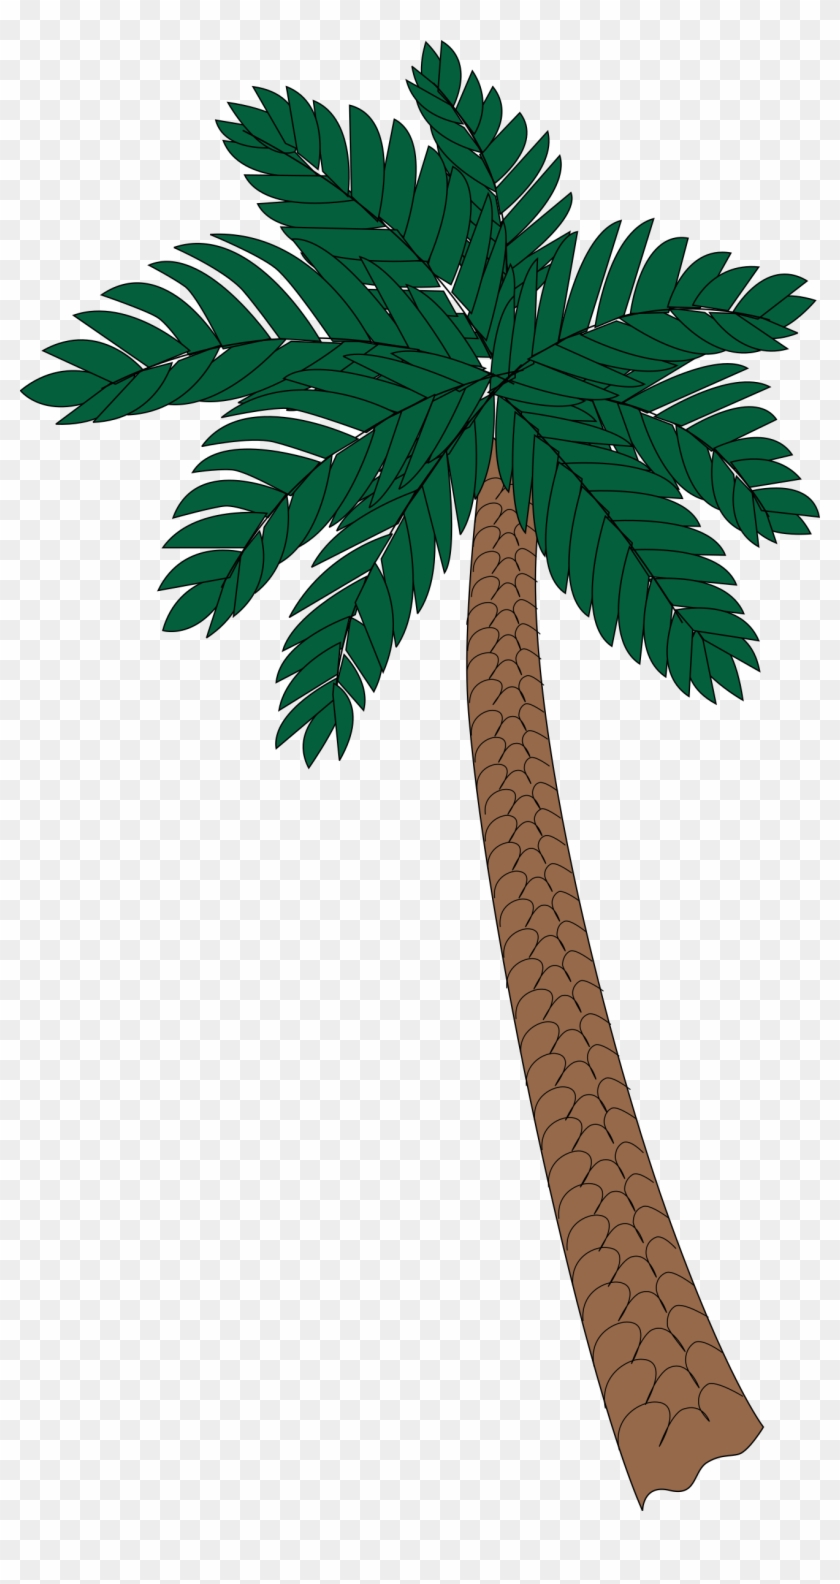 This Free Icons Png Design Of Palm Tree 2 - Palm Tree 2 #420822